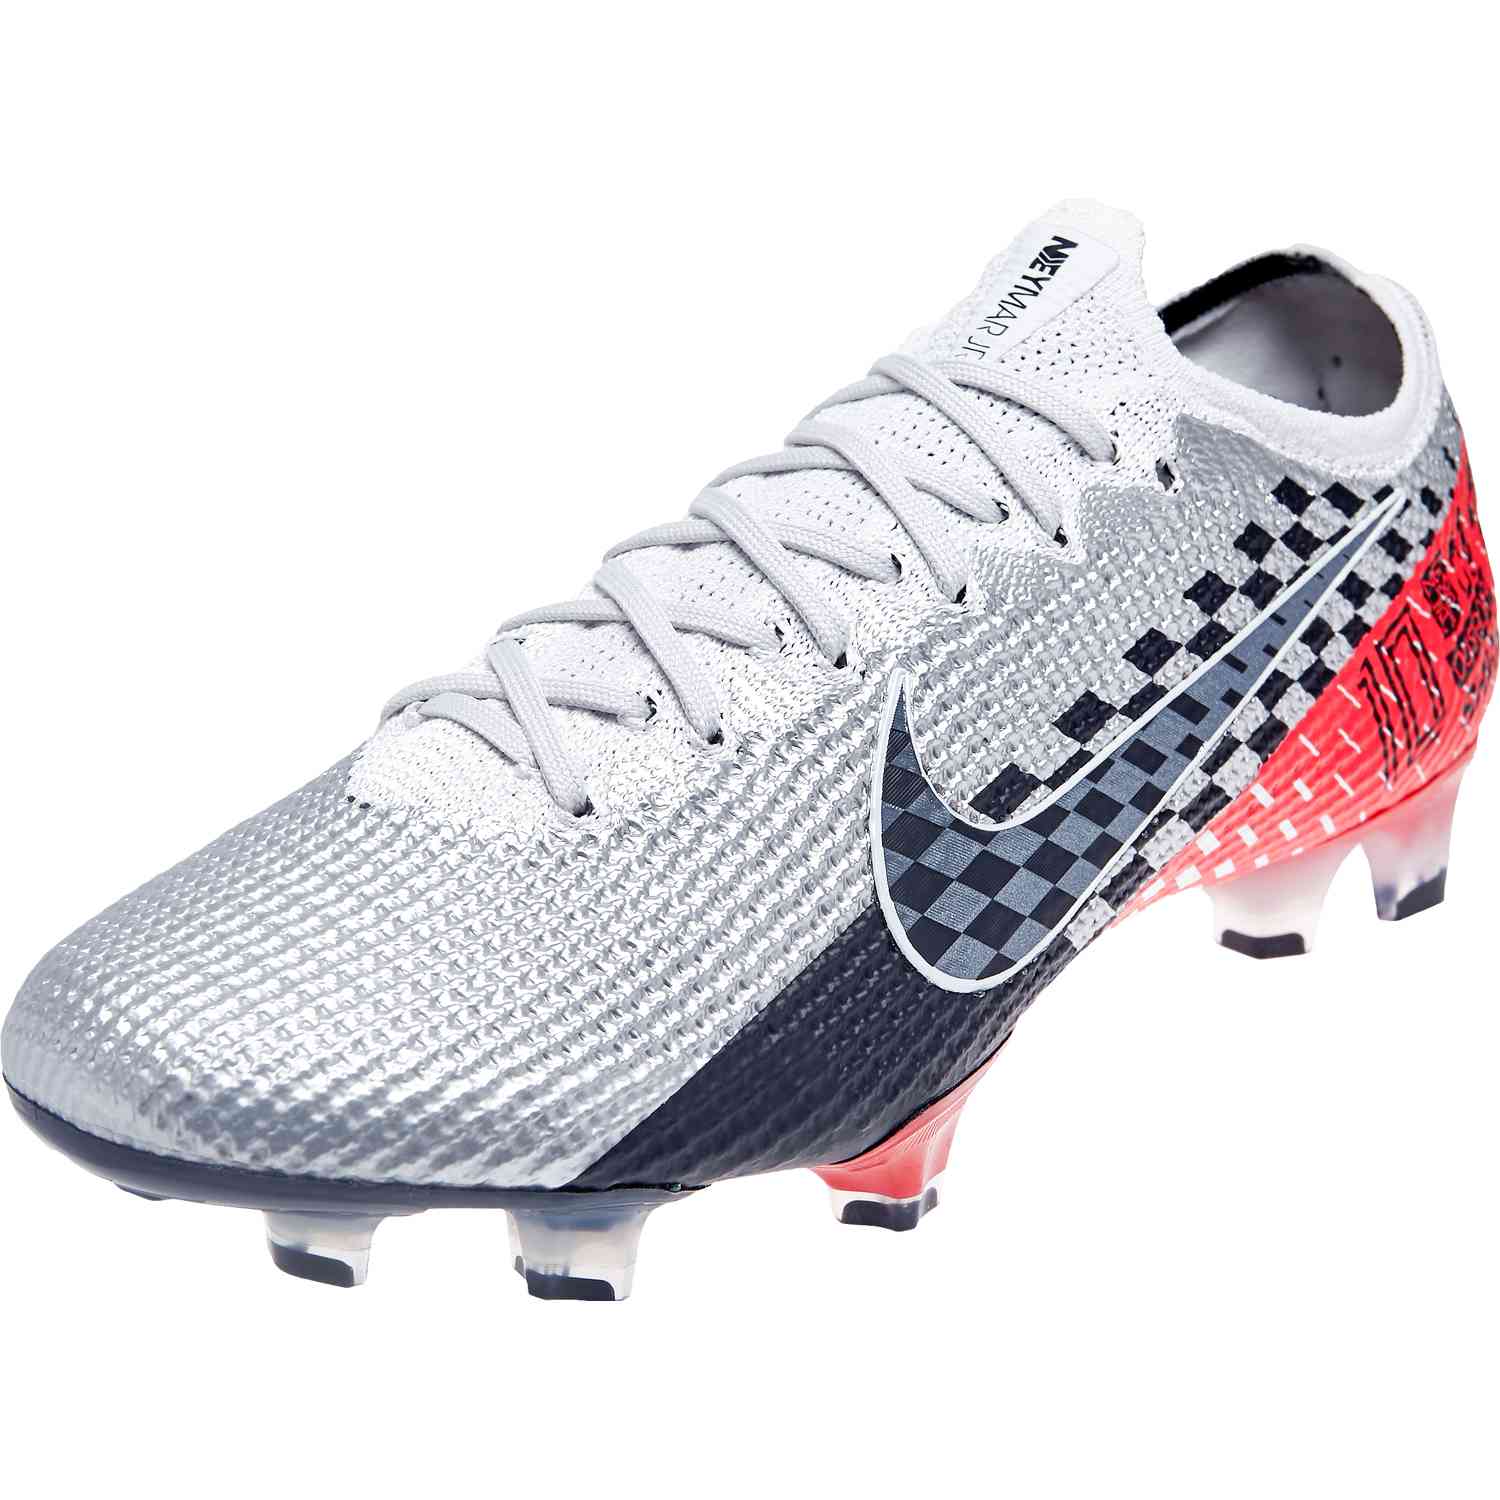 Men's Firm Ground Mercurial Soccer Cleats & Shoes Best